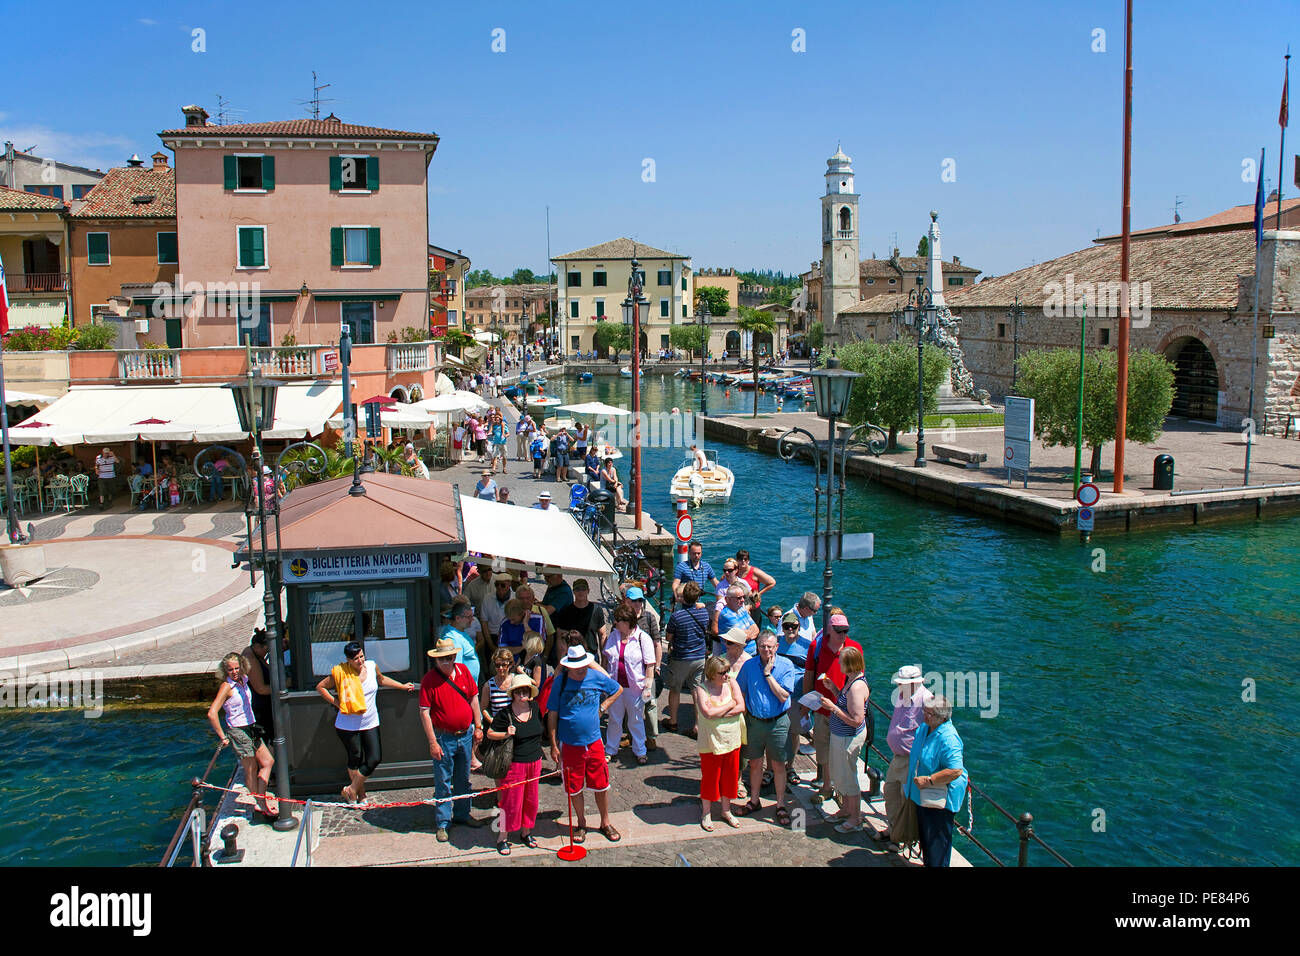 Tourists waiting on pier for the ferry, harbour entrance of Lazise, Garda lake, province Verona, Italy Stock Photo